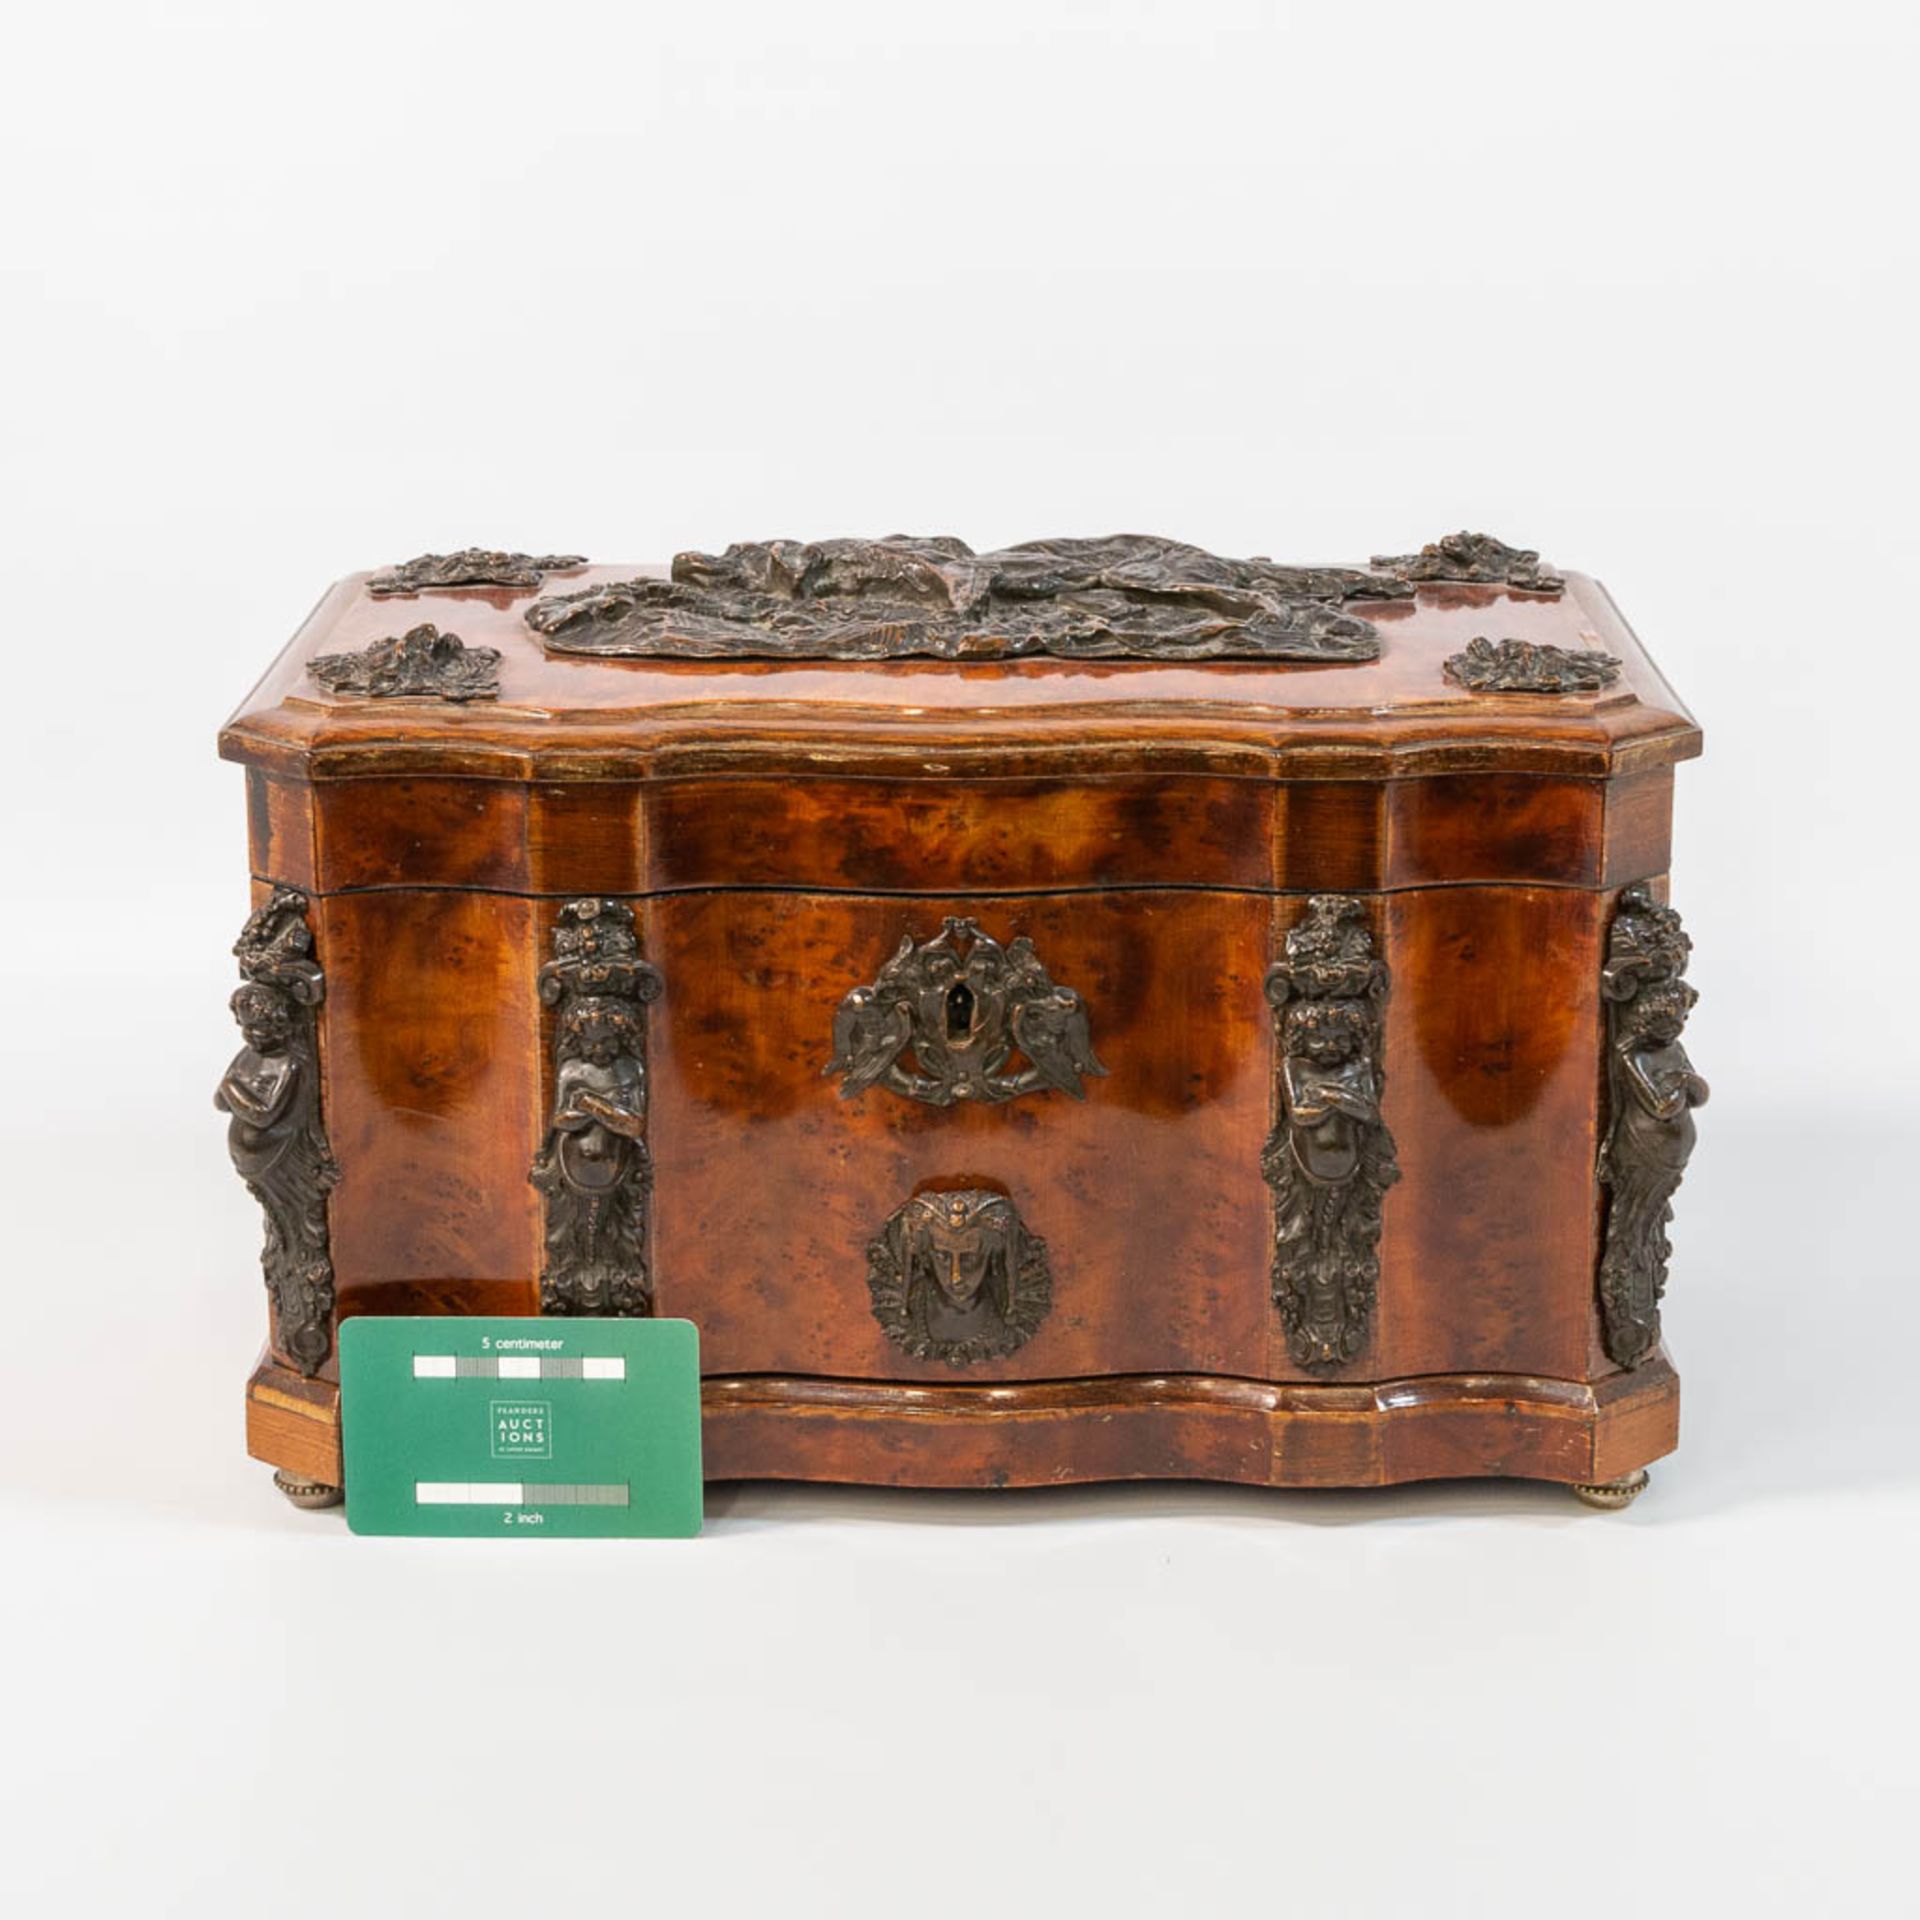 An antique Jewellry box, made of root wood and mounted with bonze hunting scenes, 19th century. - Bild 2 aus 20